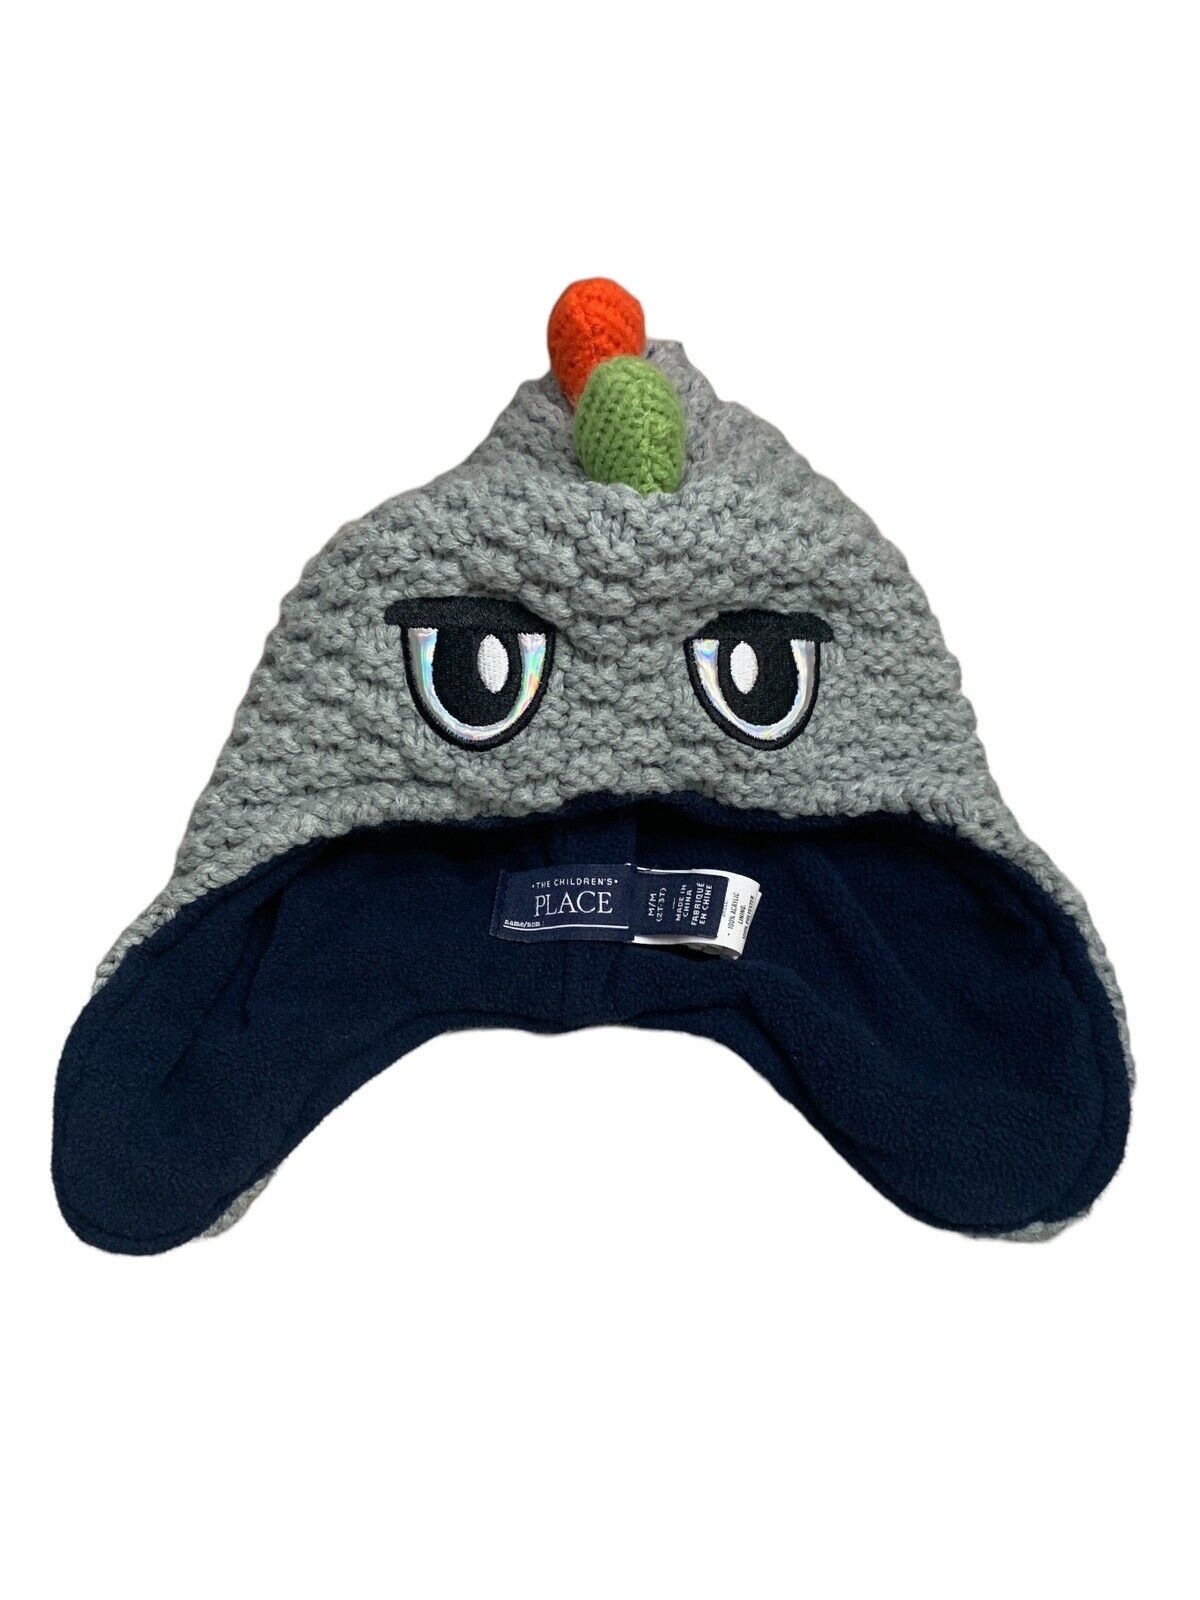 Dinosaur Hat Gray Primary Color Children's Place 2T/ 3T Knit Monster Boy Girl - $14.25